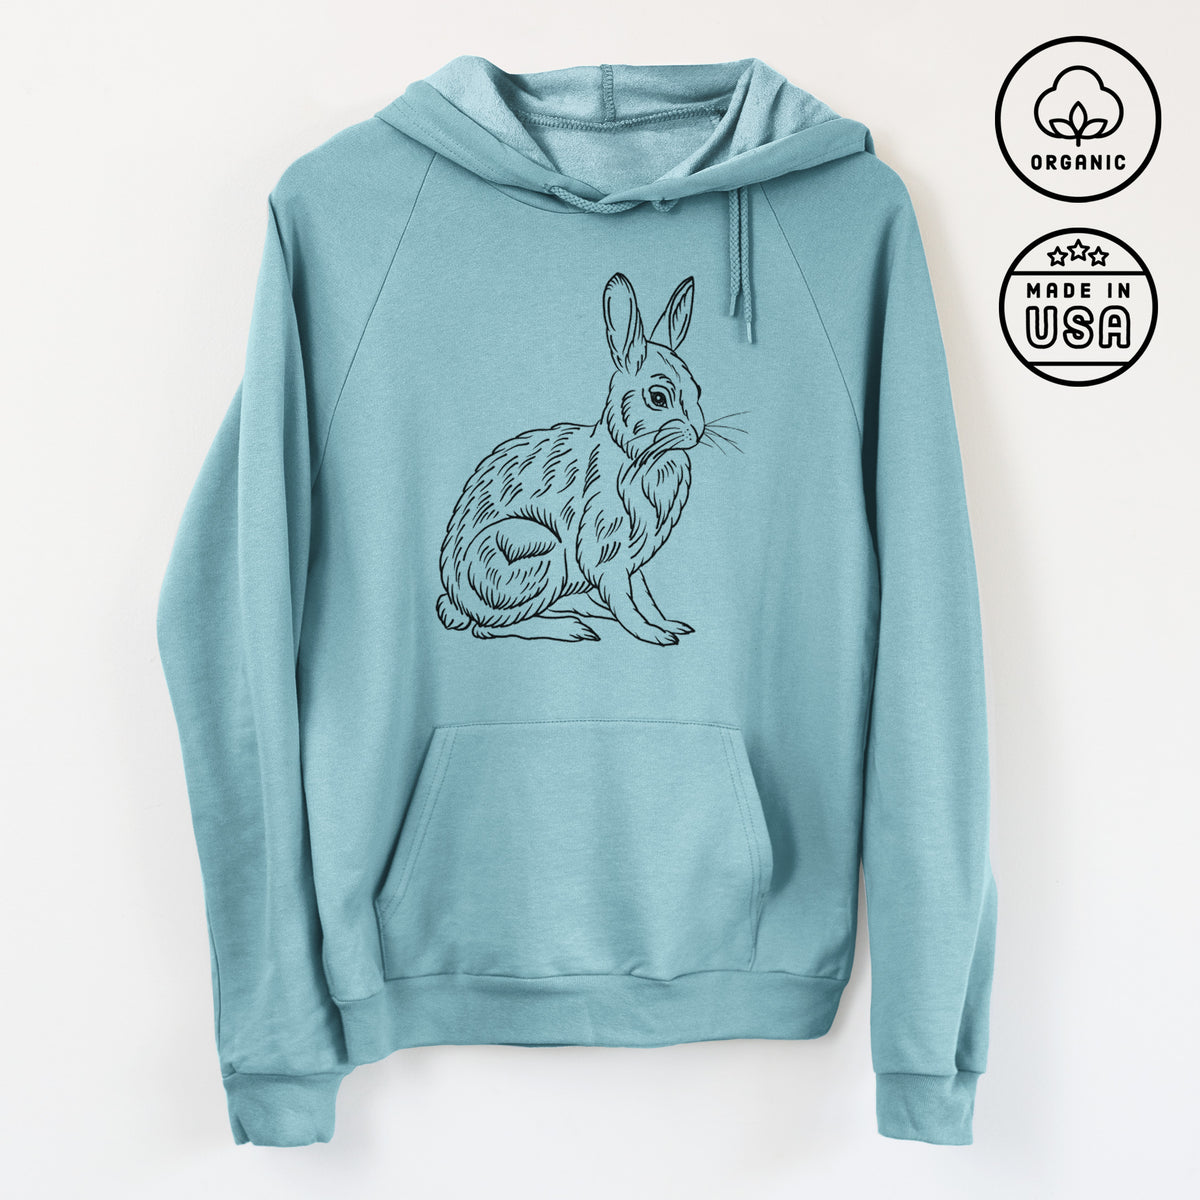 Snoeshoe Hare - Unisex Pullover Hoodie - Made in USA - 100% Organic Cotton